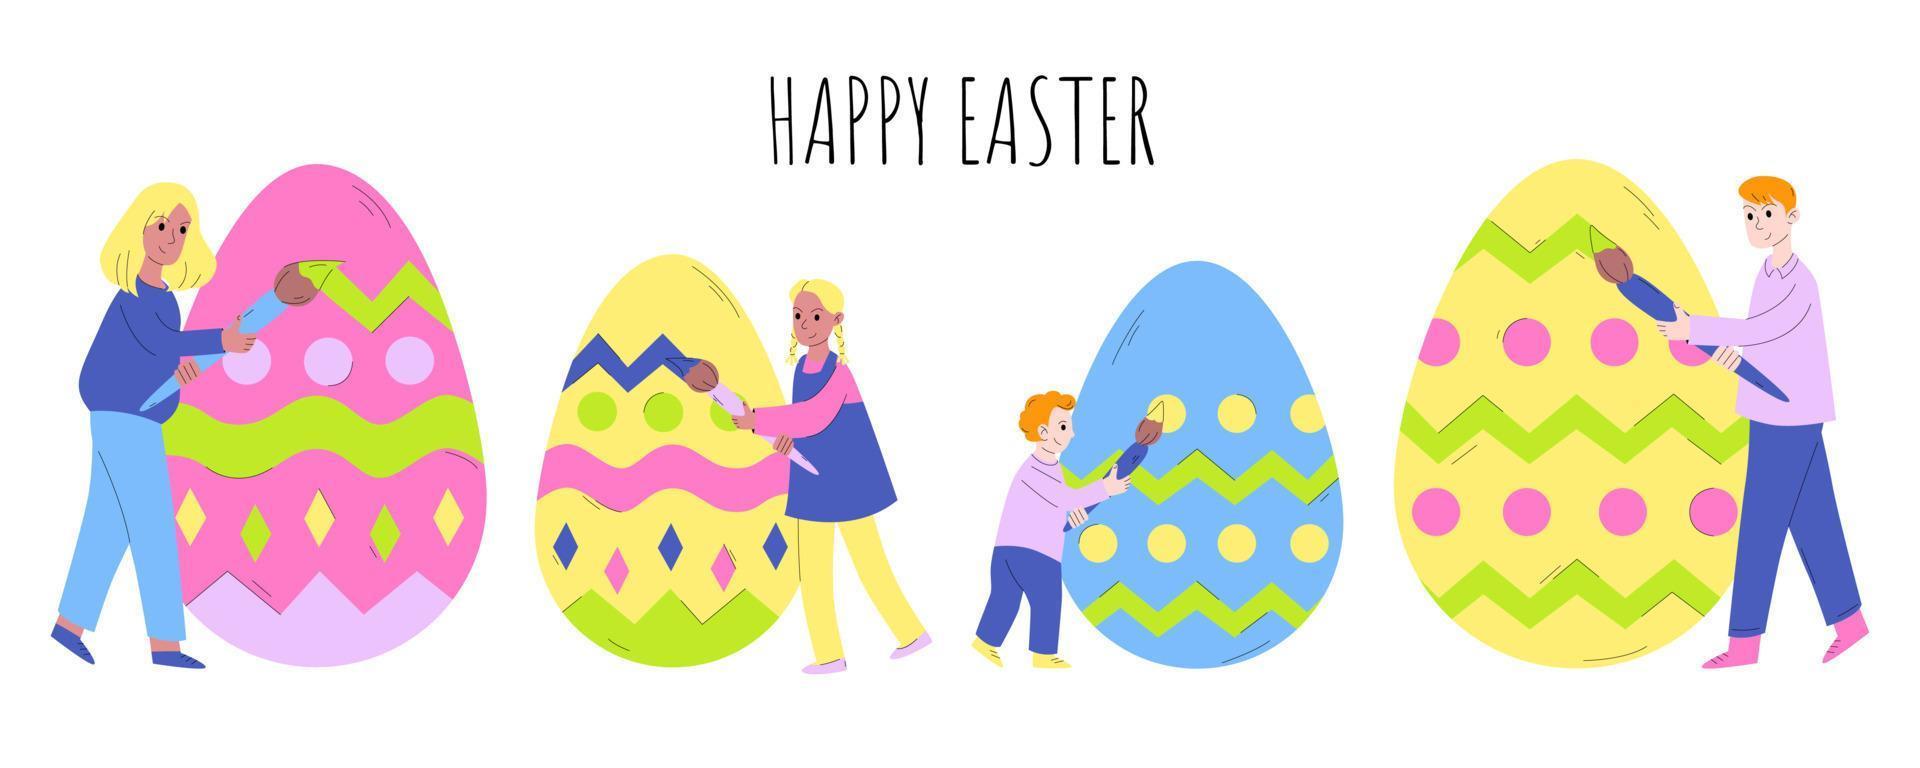 Tiny people paint Easter eggs. Happy Easter. The concept of preparing for Easter, celebrating Easter with the whole family. Vector illustration in cartoon style.